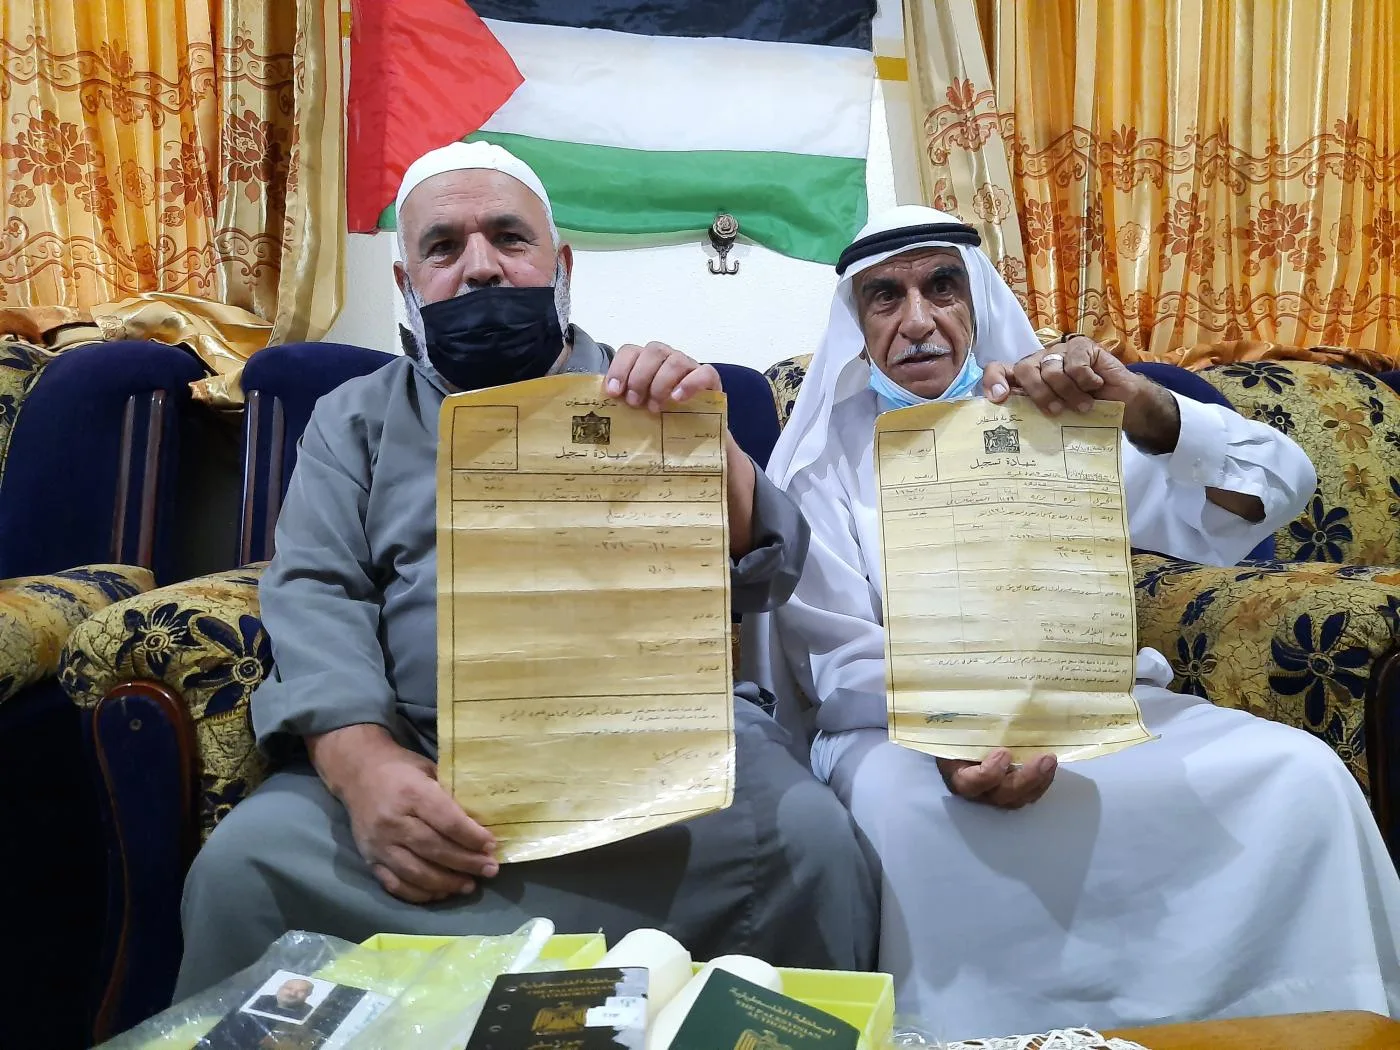 Abu Hamed ( on the left) and his 70-year-old Mohammed hold their land titles